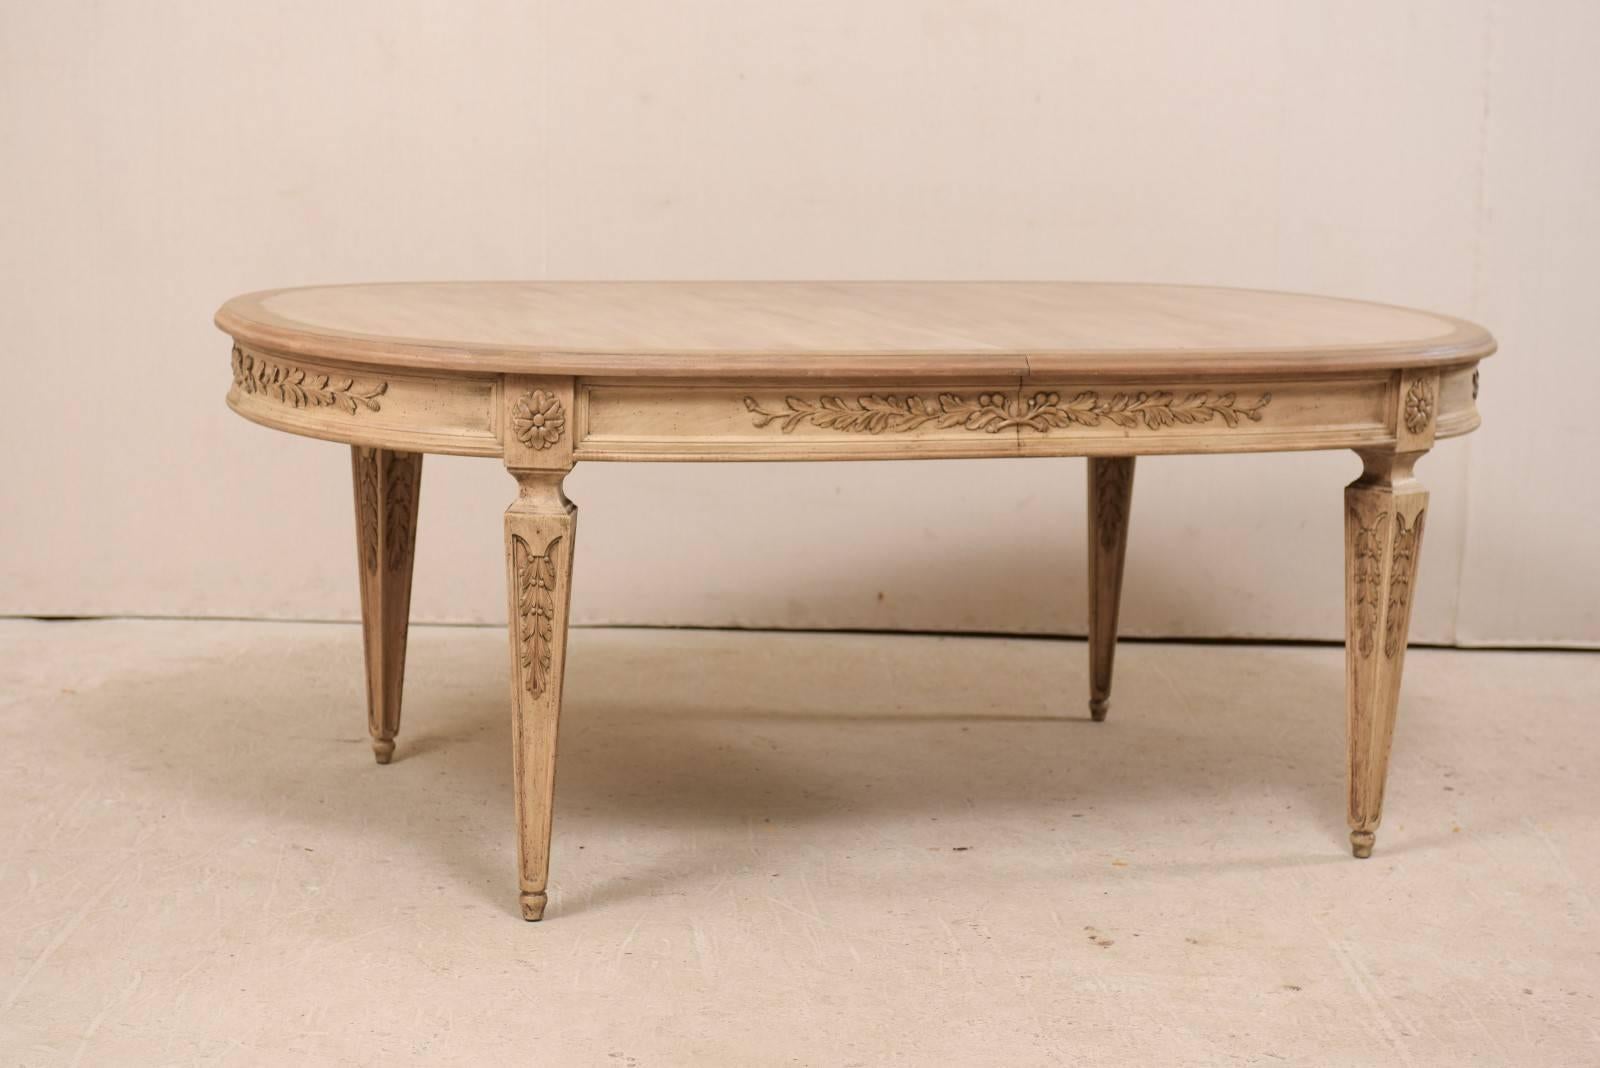 Beautifully Carved Ash Wood Oval Dining Table with Removable Leaves 2